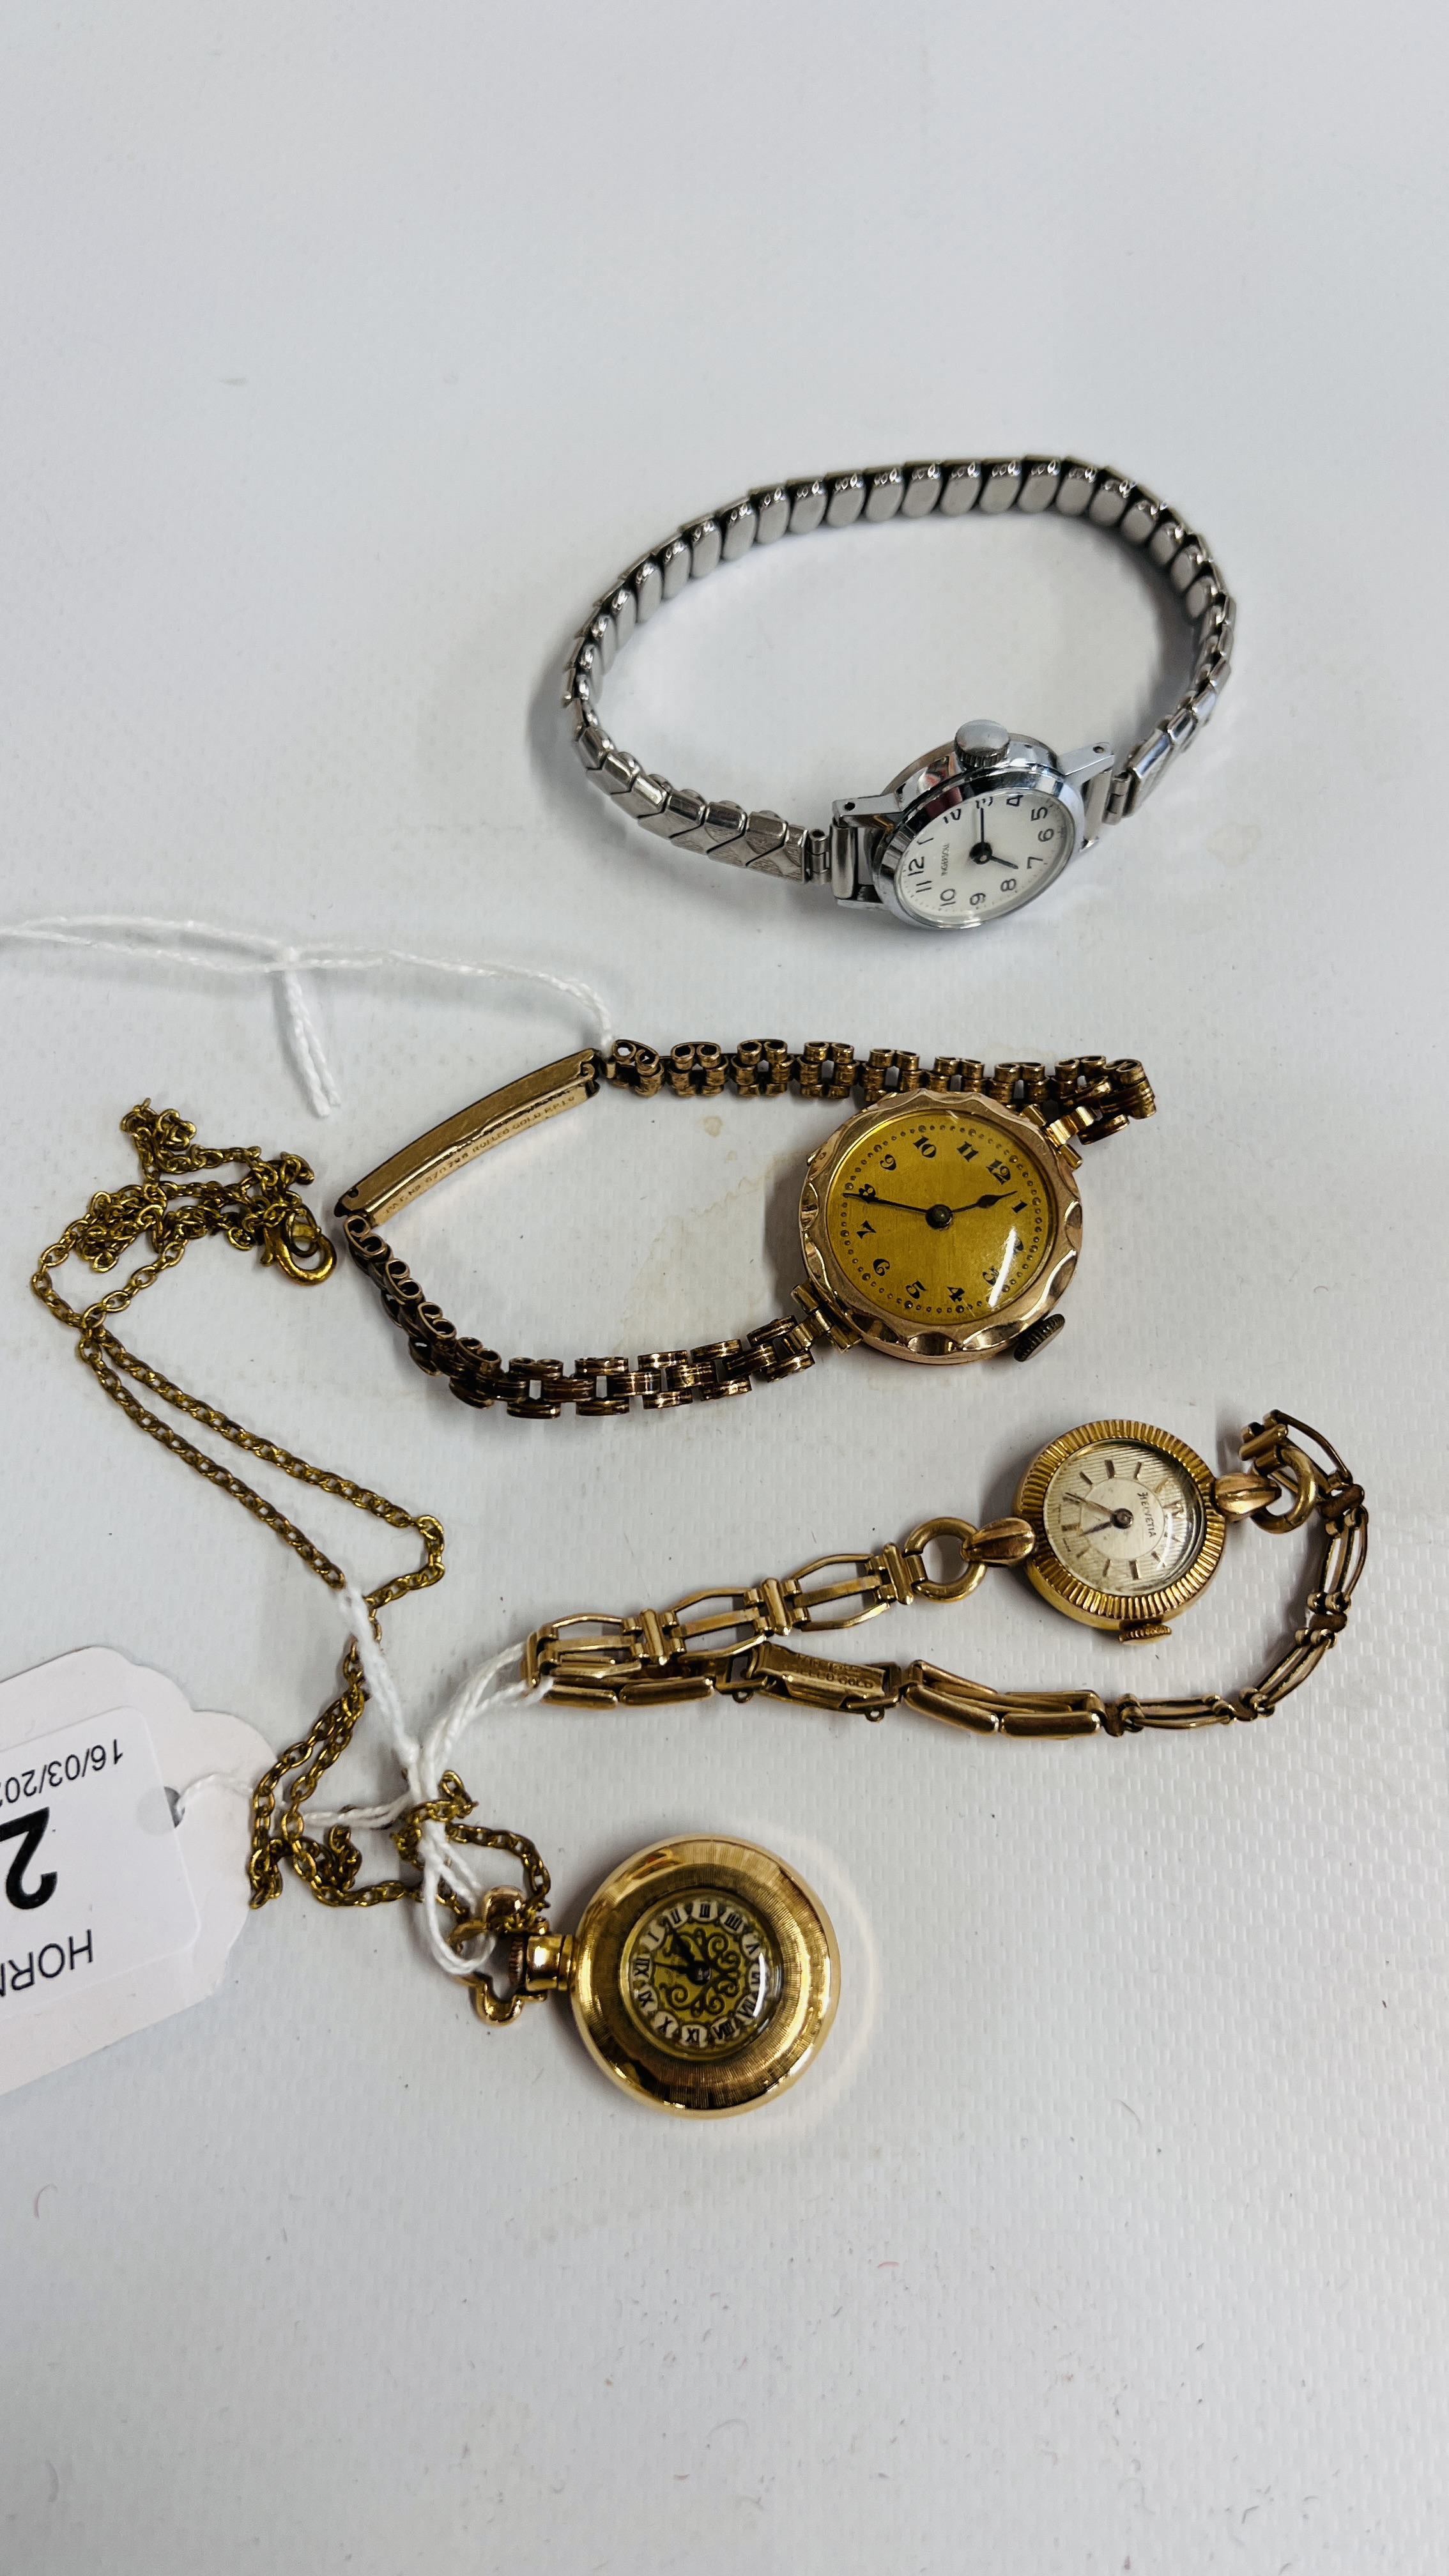 A PLATED CHAIN SUPPORTING A PLATED WATCH, A LADIES HELVETIA WRIST WATCH STEEL AND GOLD PLATED,